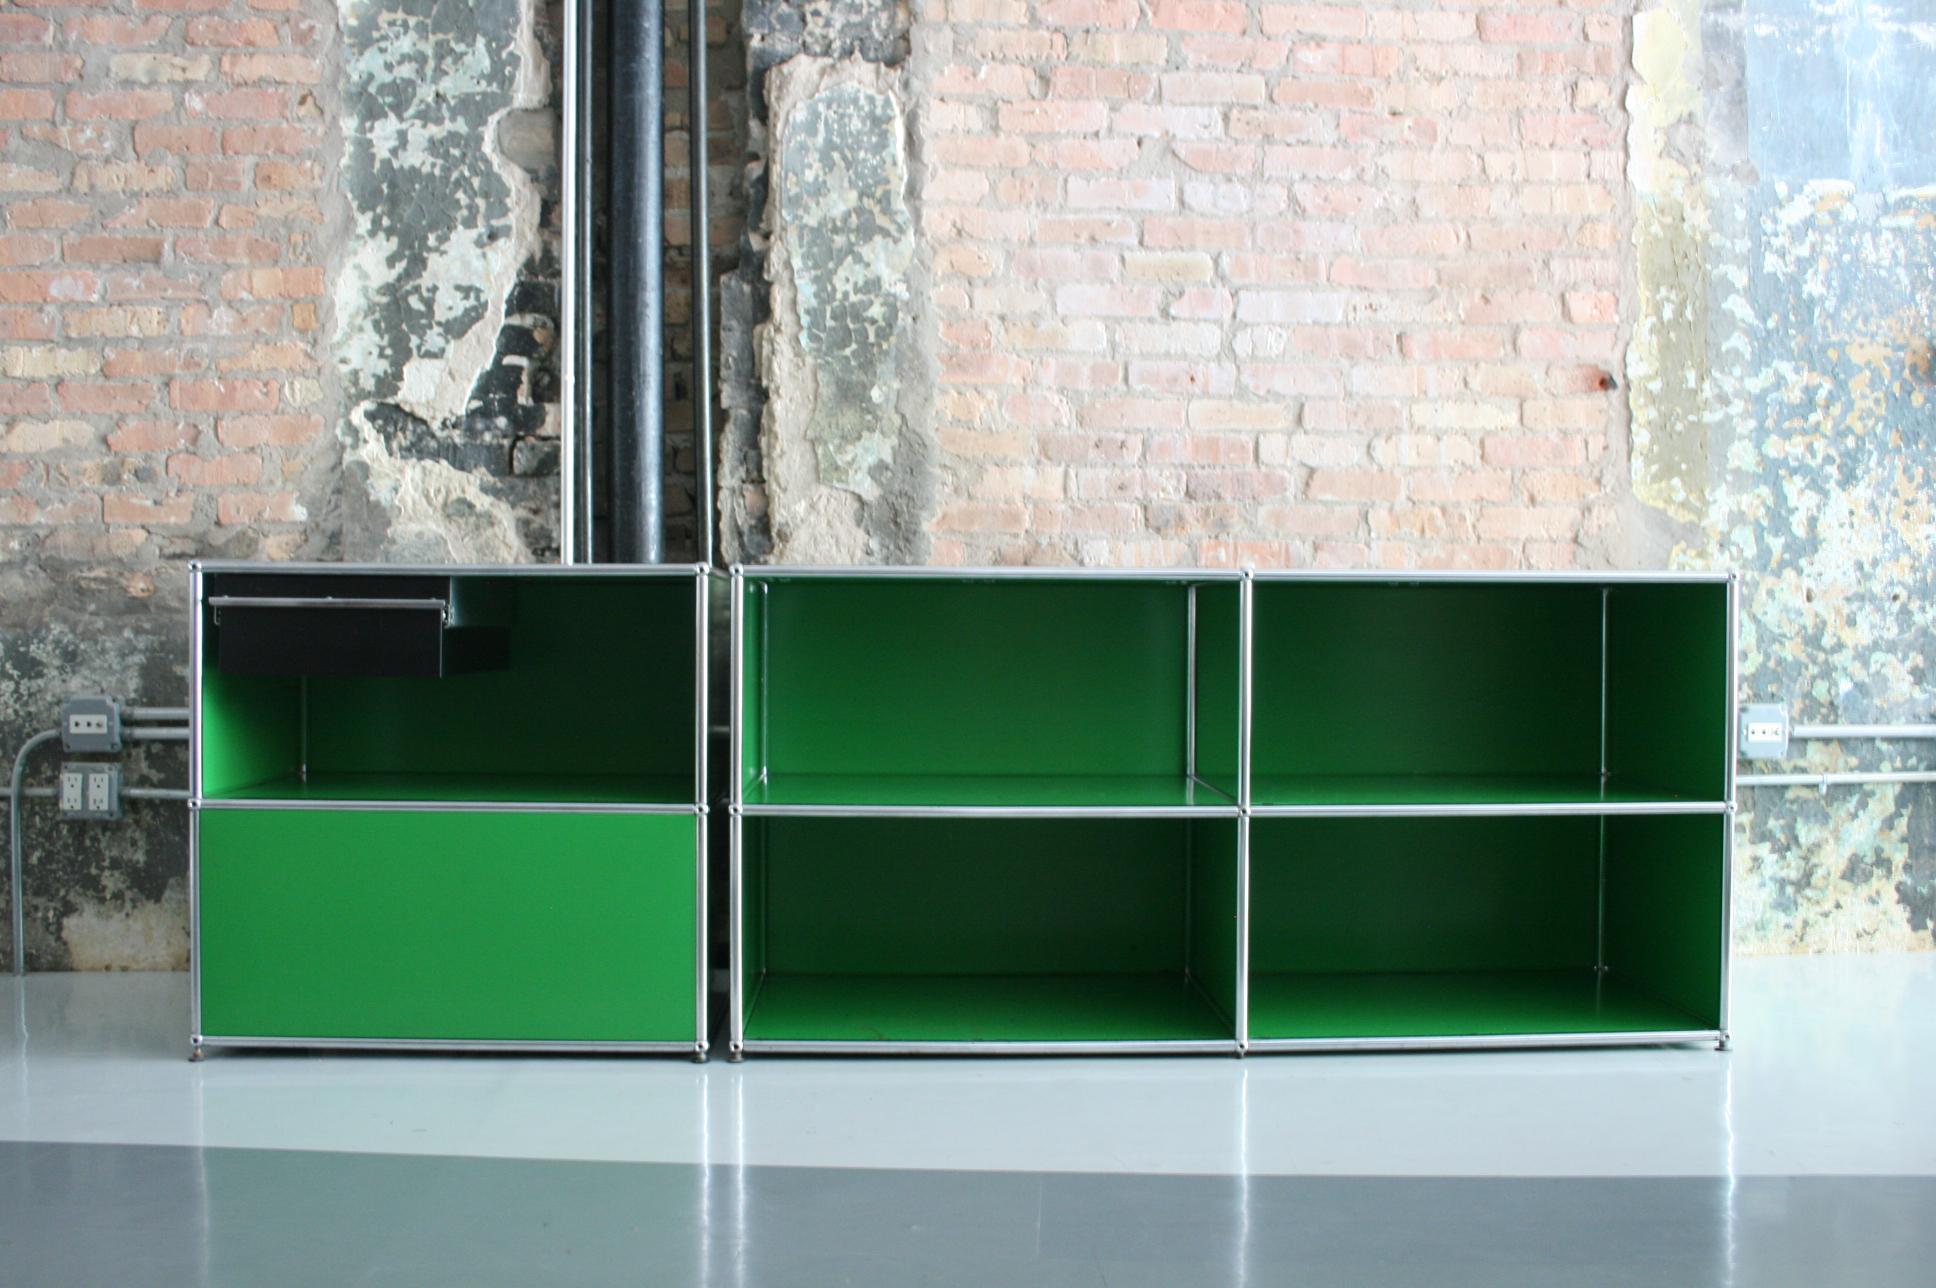 A beautiful vintage set or cabinets in green designed by Fritz Haller for Usm Haller, Switzerland, circa 1960s. Each case shows very slight oxidization and minimal wear on the green metal panels and the chrome-plated steel formwork. These are